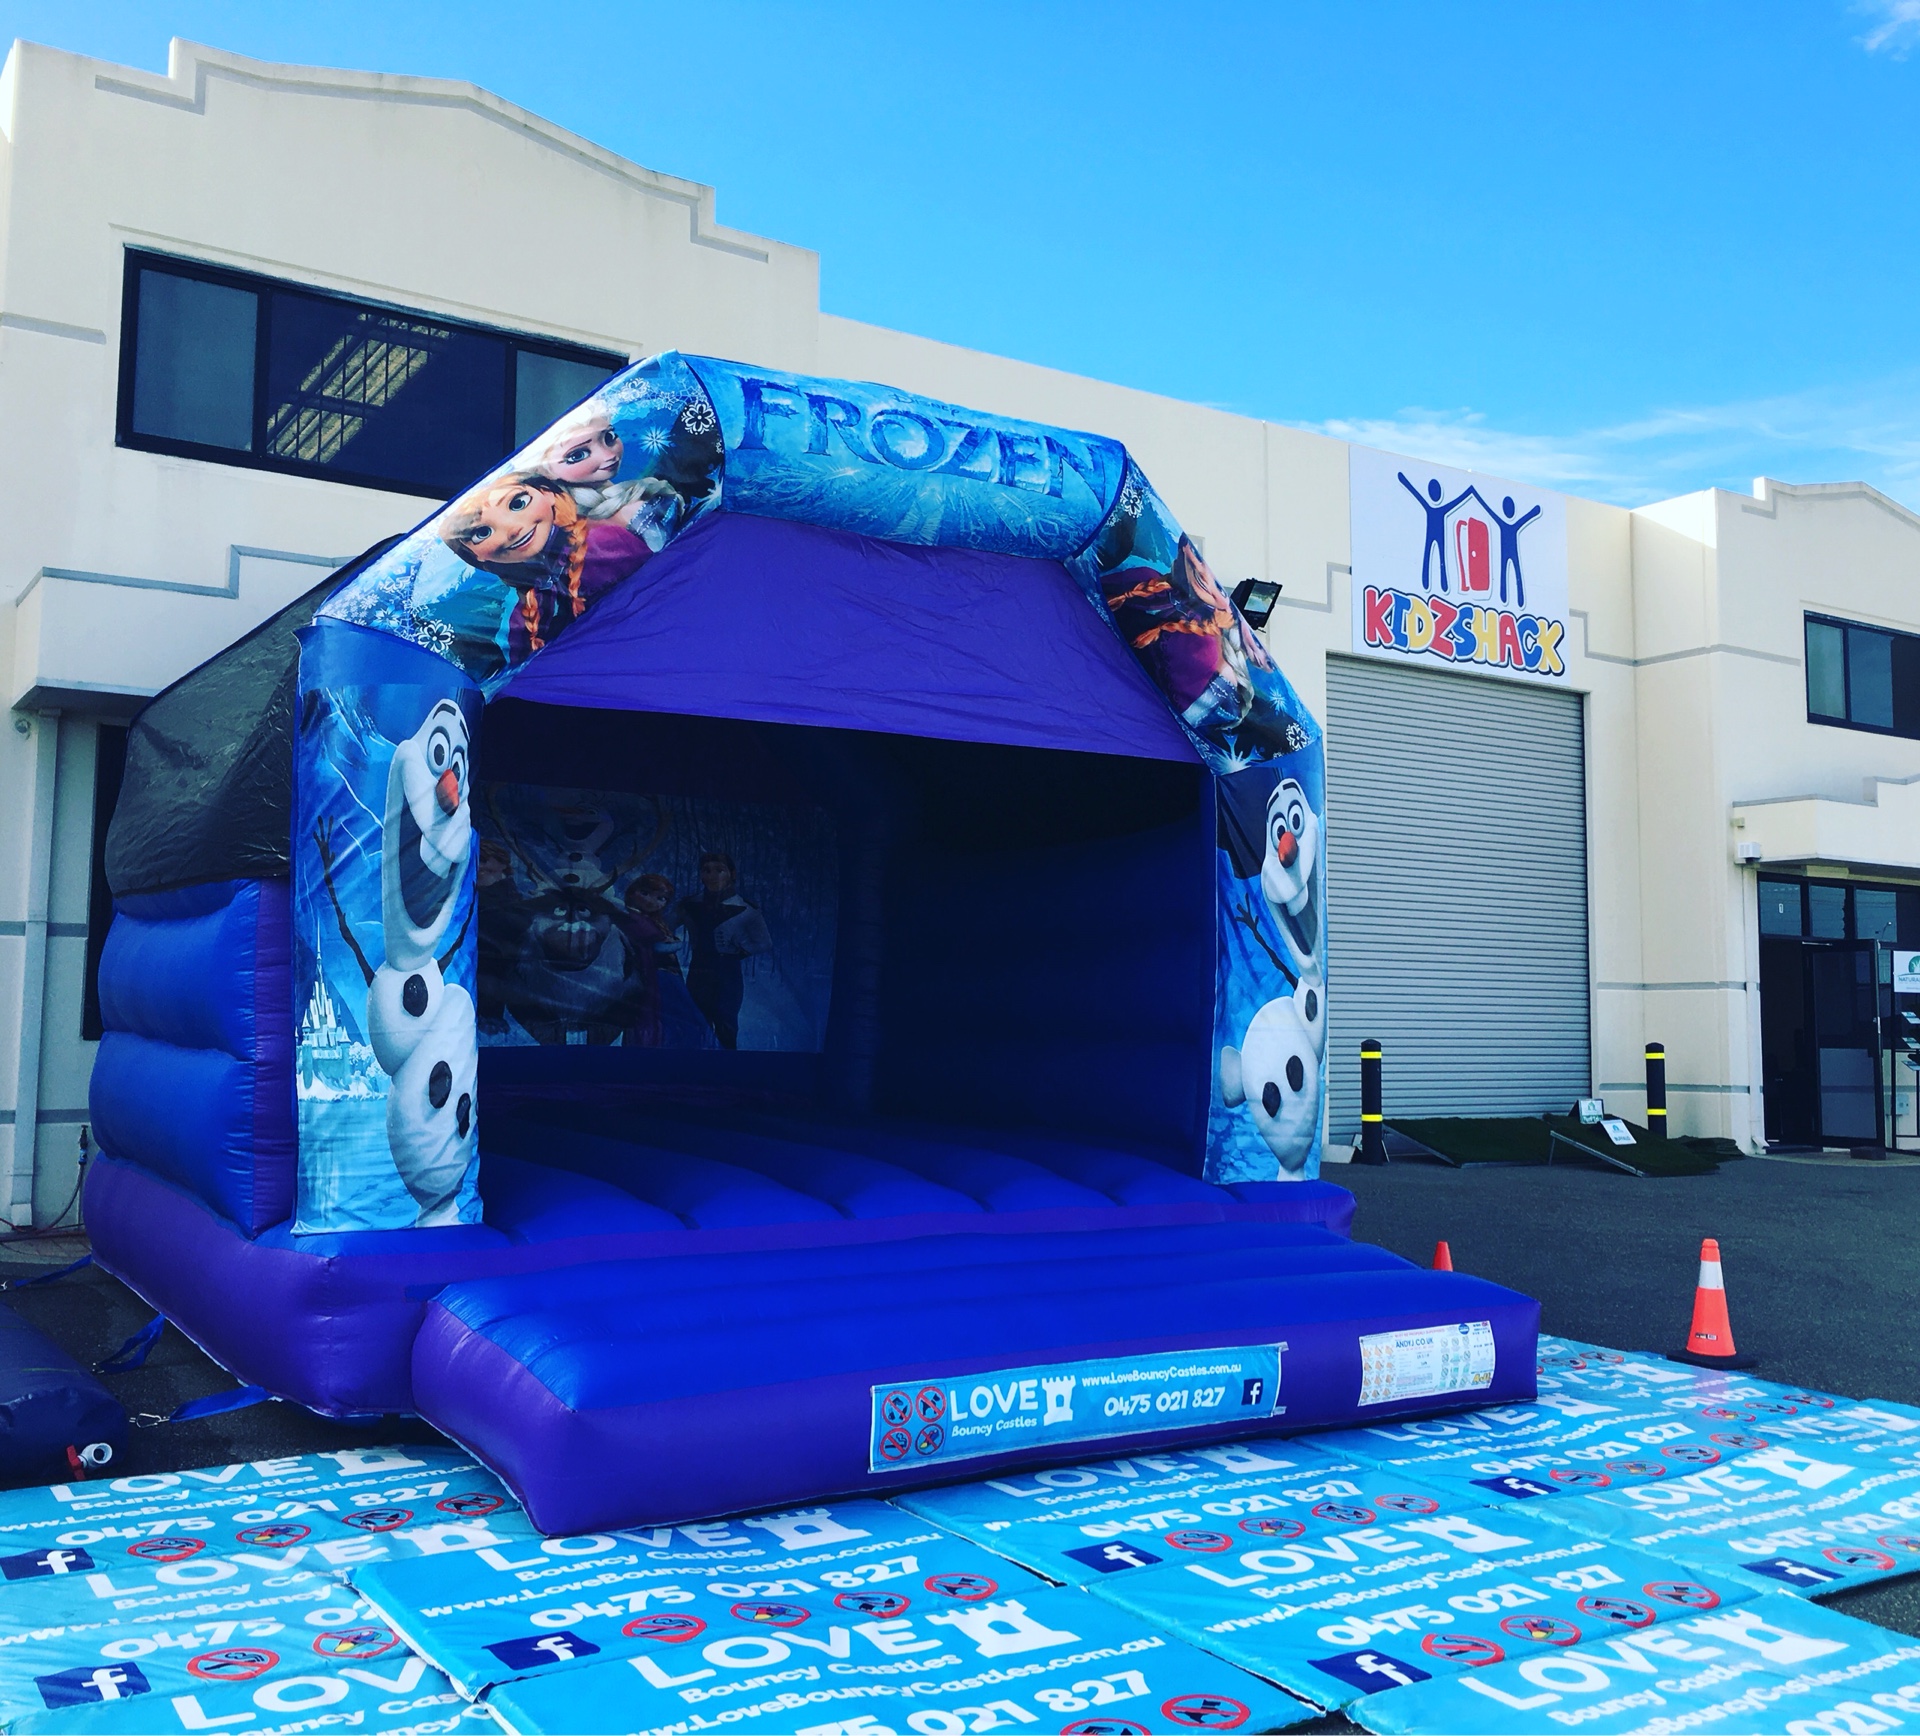 Copy of Frozen Bouncy Castle Set Up In Perth For A Shop Opening.